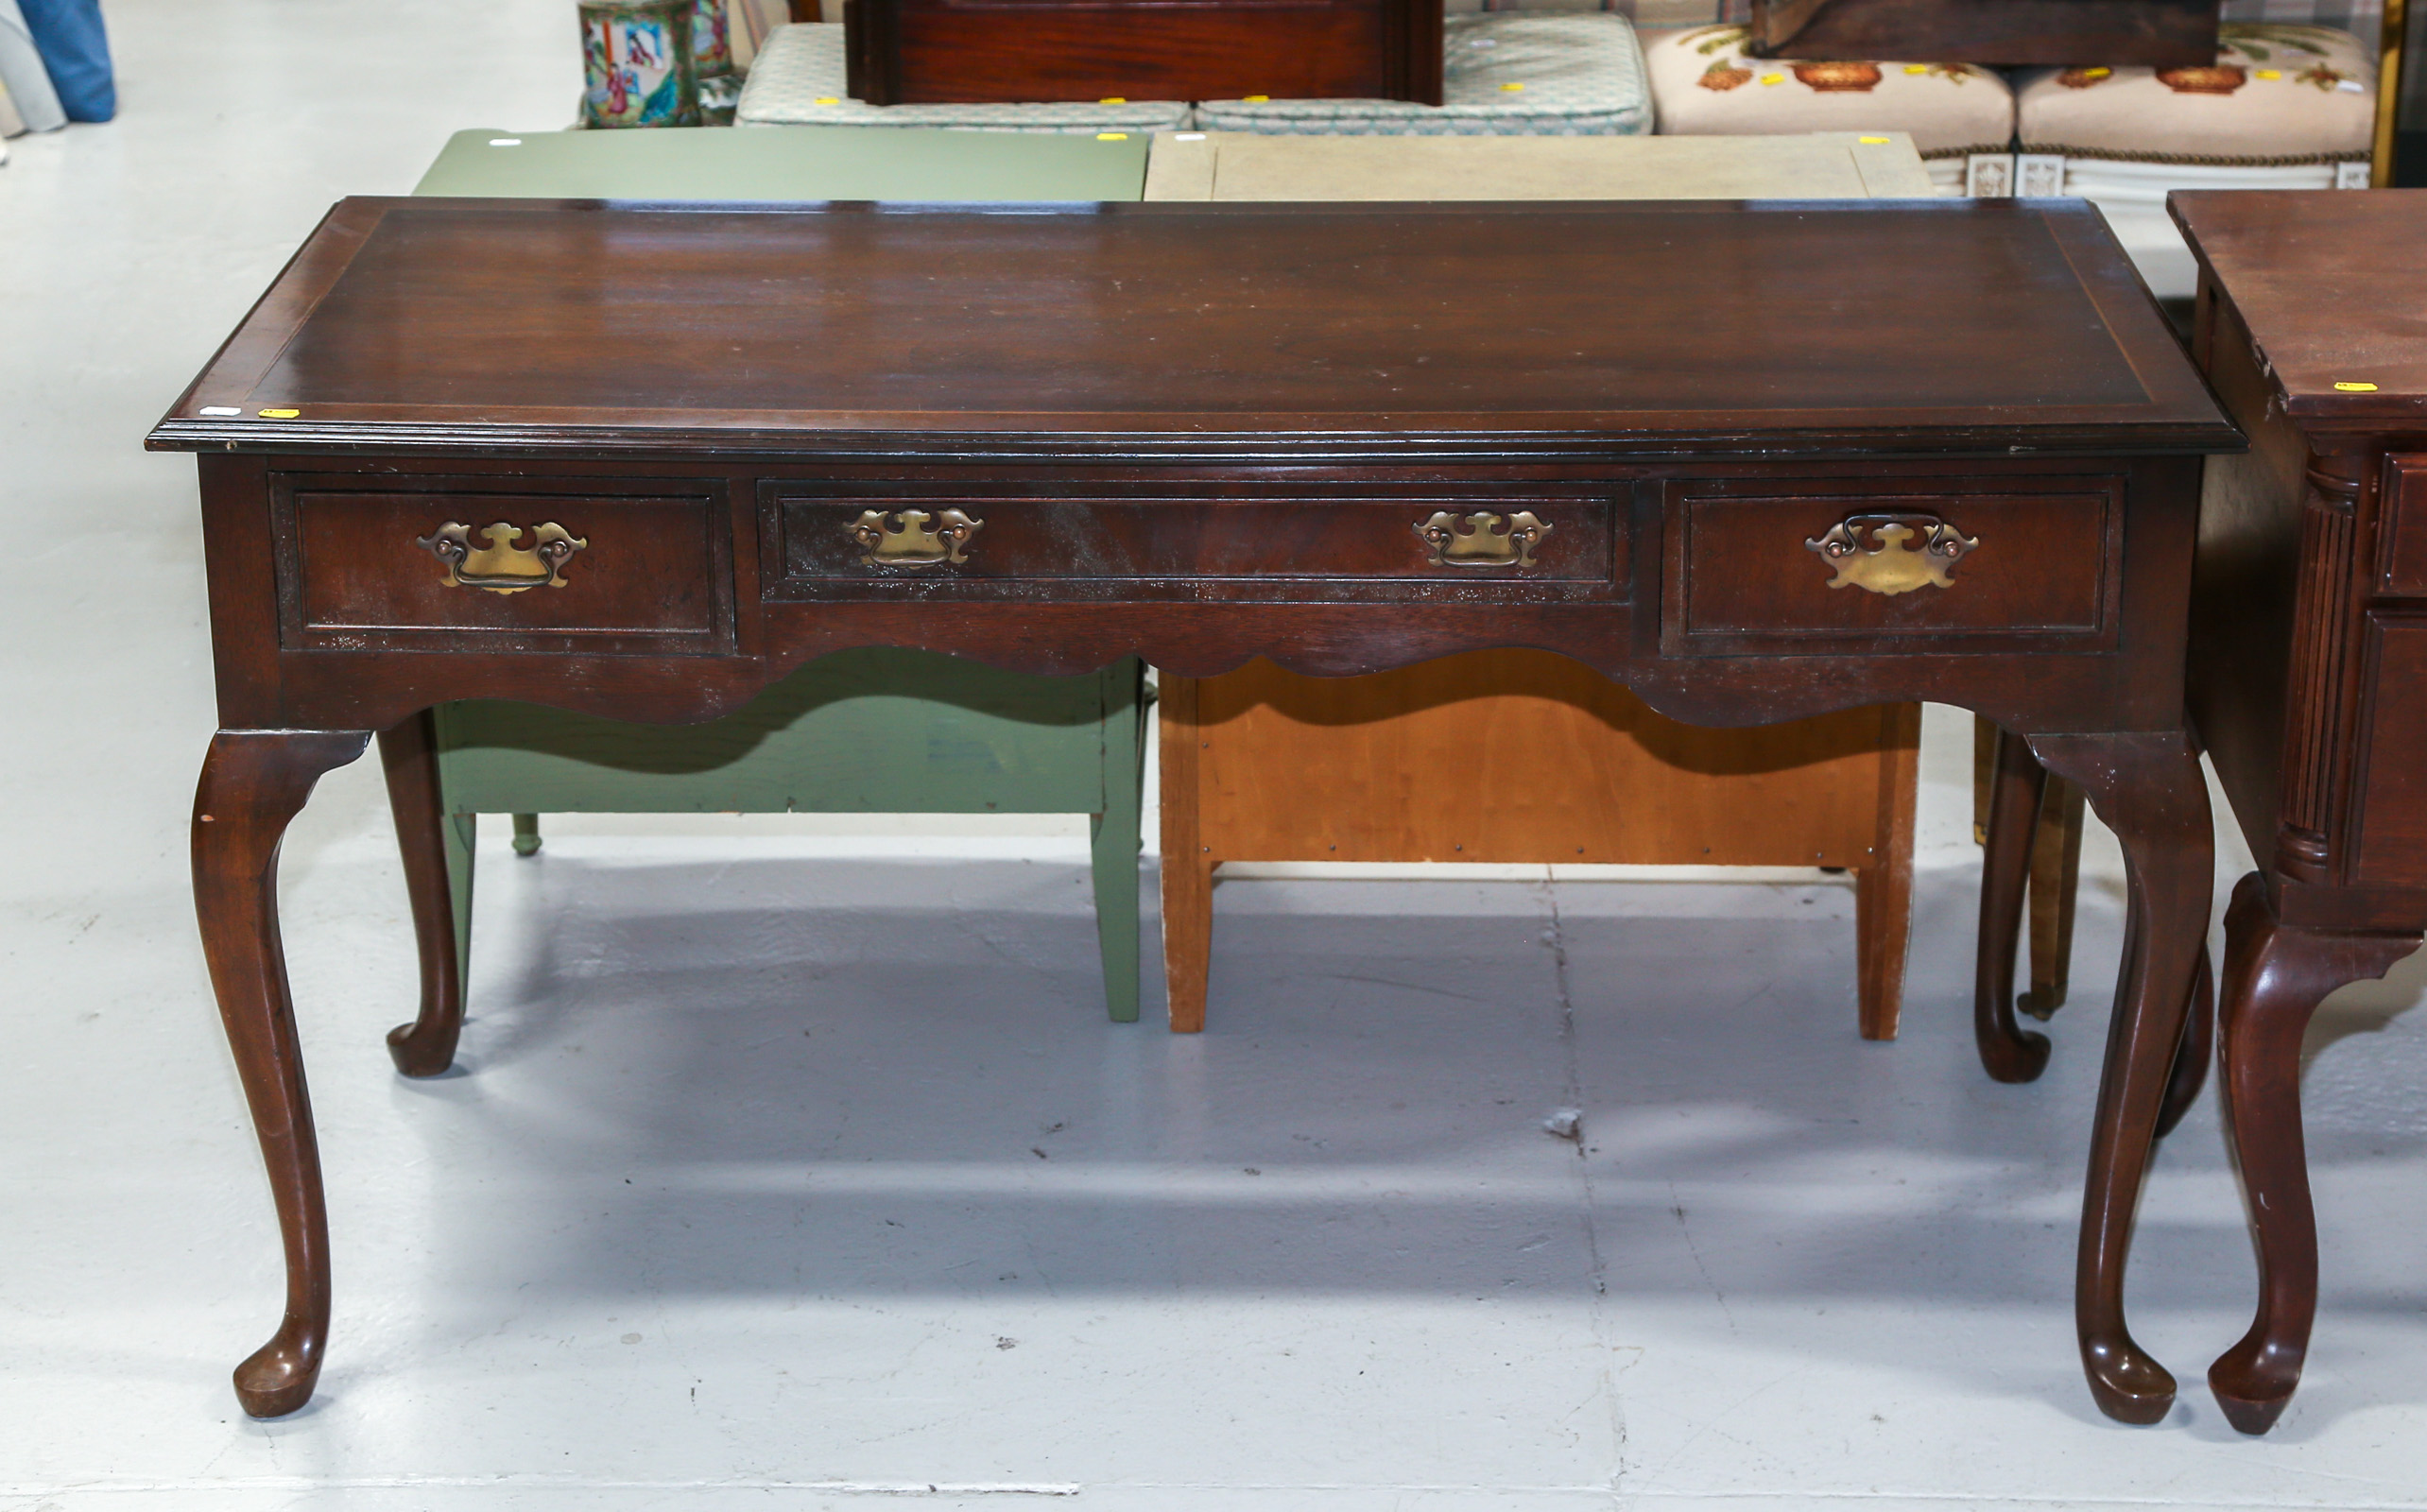 A QUEEN ANNE STYLE MAHOGANY DESK